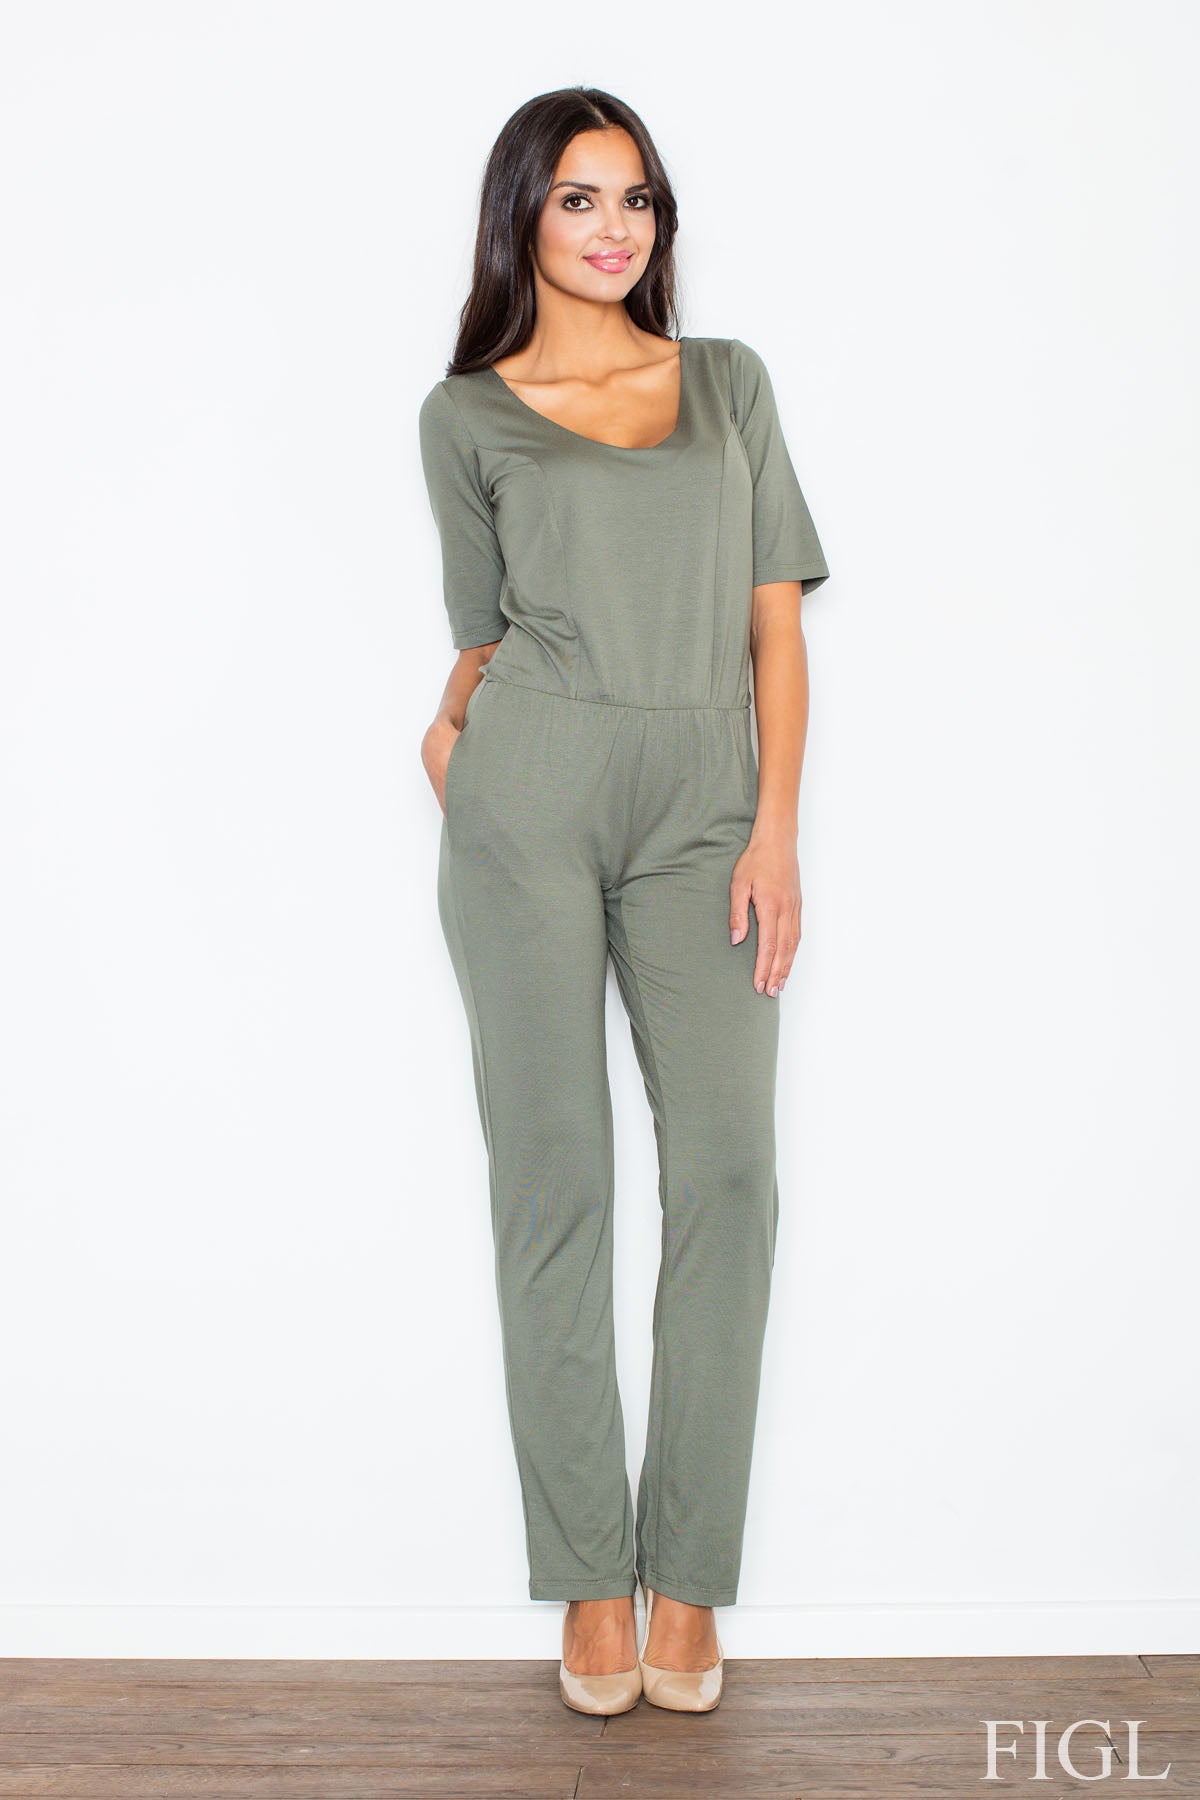 Women's Suit model 49928 - Ladies Casual Everyday Clothing - Jumpsuit & Romper - Green Color